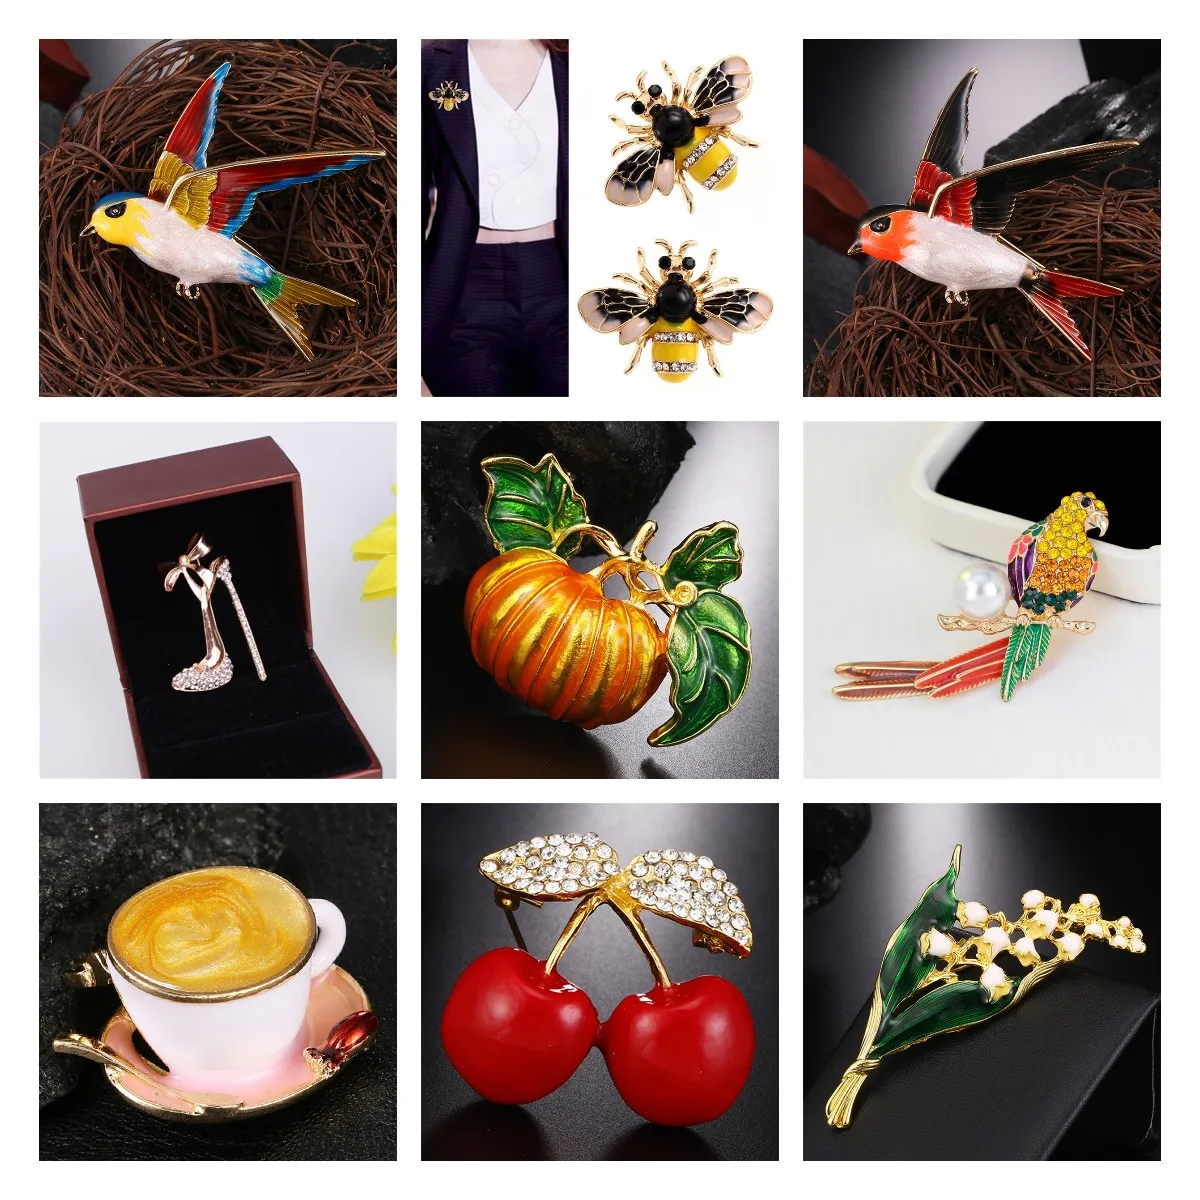 

Jewelry Women Men's Brooch Clothes Accessories Owl Butterfly Dragonfly Frog Peacock Bird Brooch Collar Pins Corsage Animal Badge